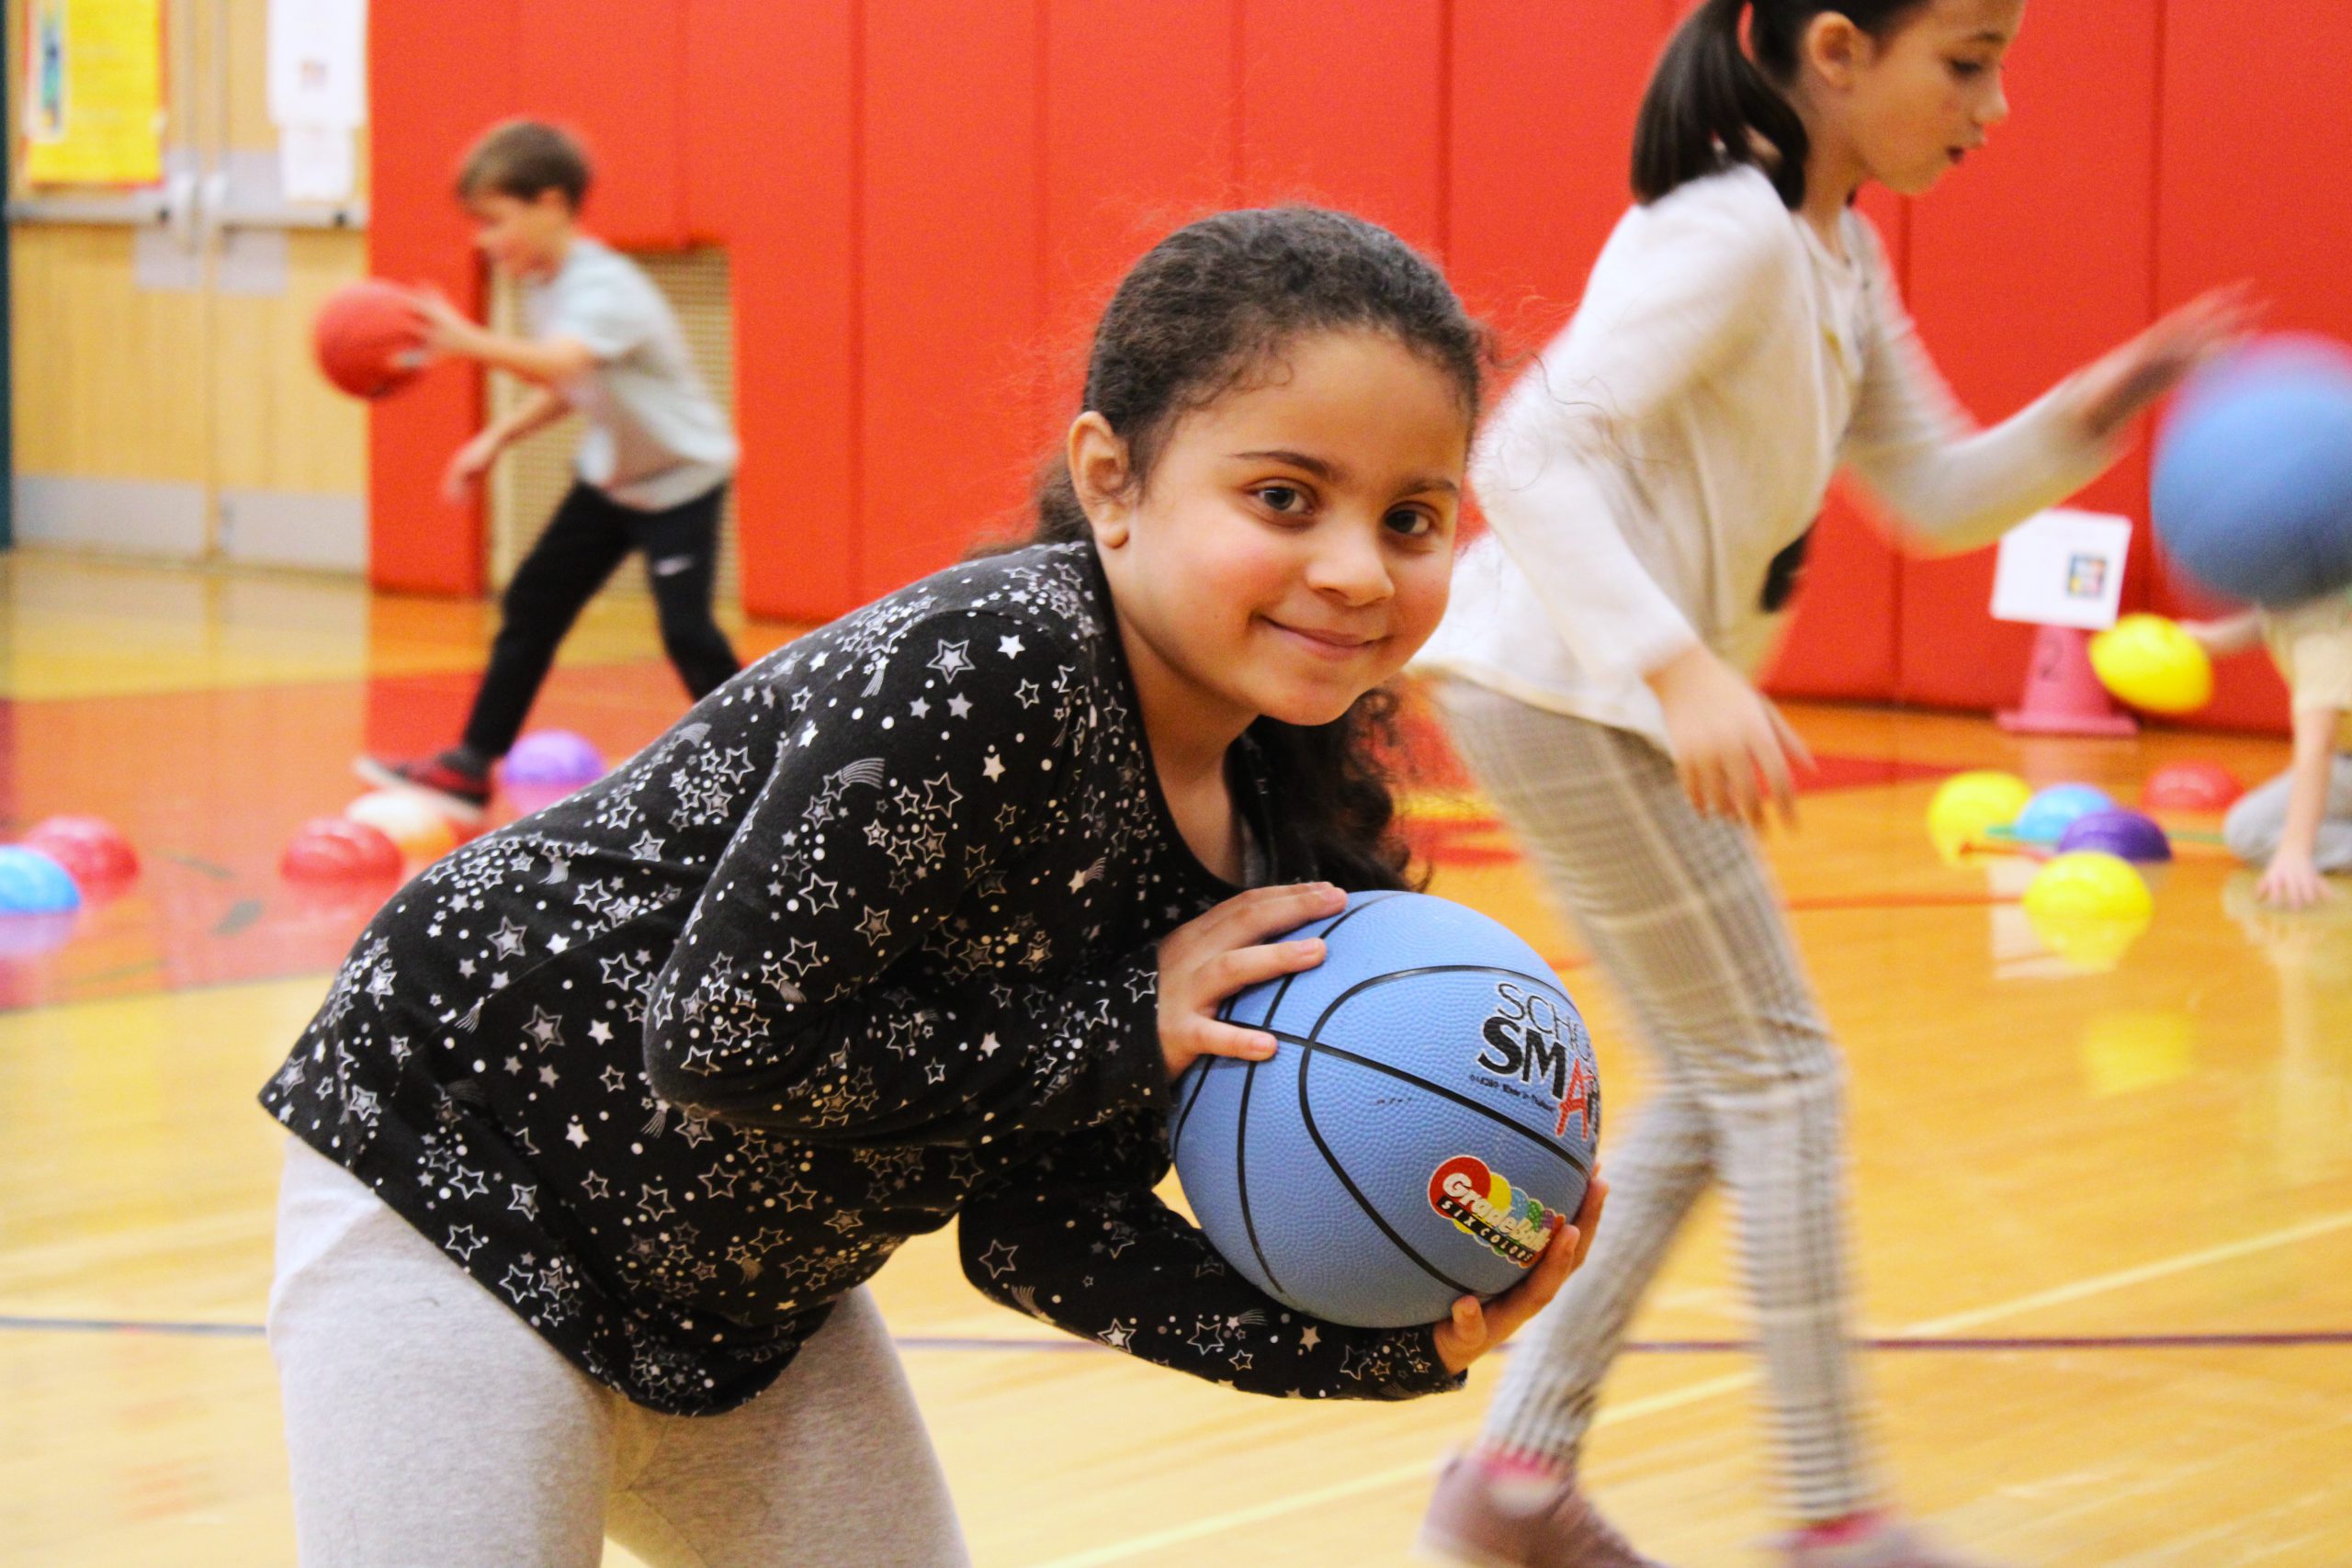 Image of student posing with basketball during gym class.